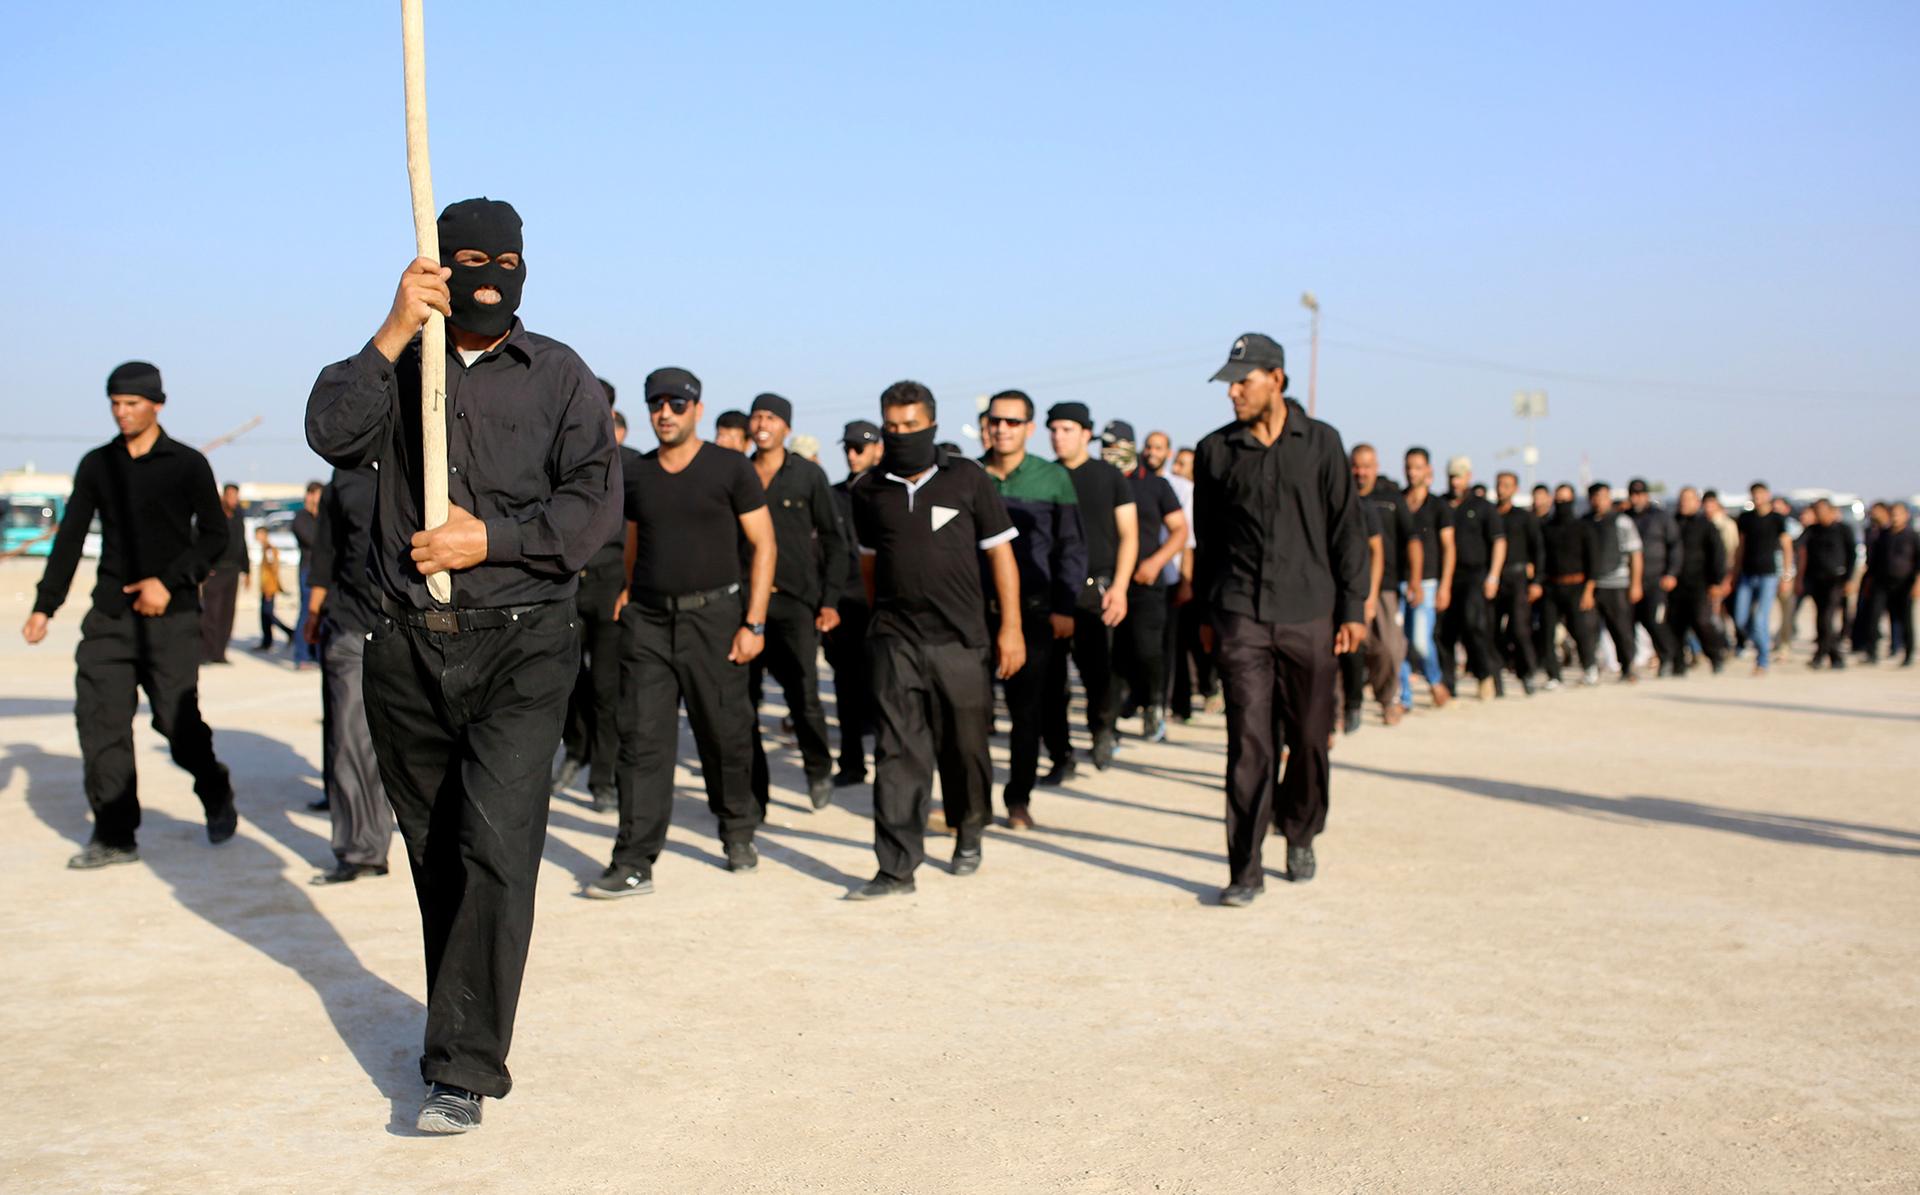 Mehdi Army fighters loyal to Shi'ite cleric Moqtada al-Sadr march during a military-style training in the holy city of Najaf, June 16, 2014. 